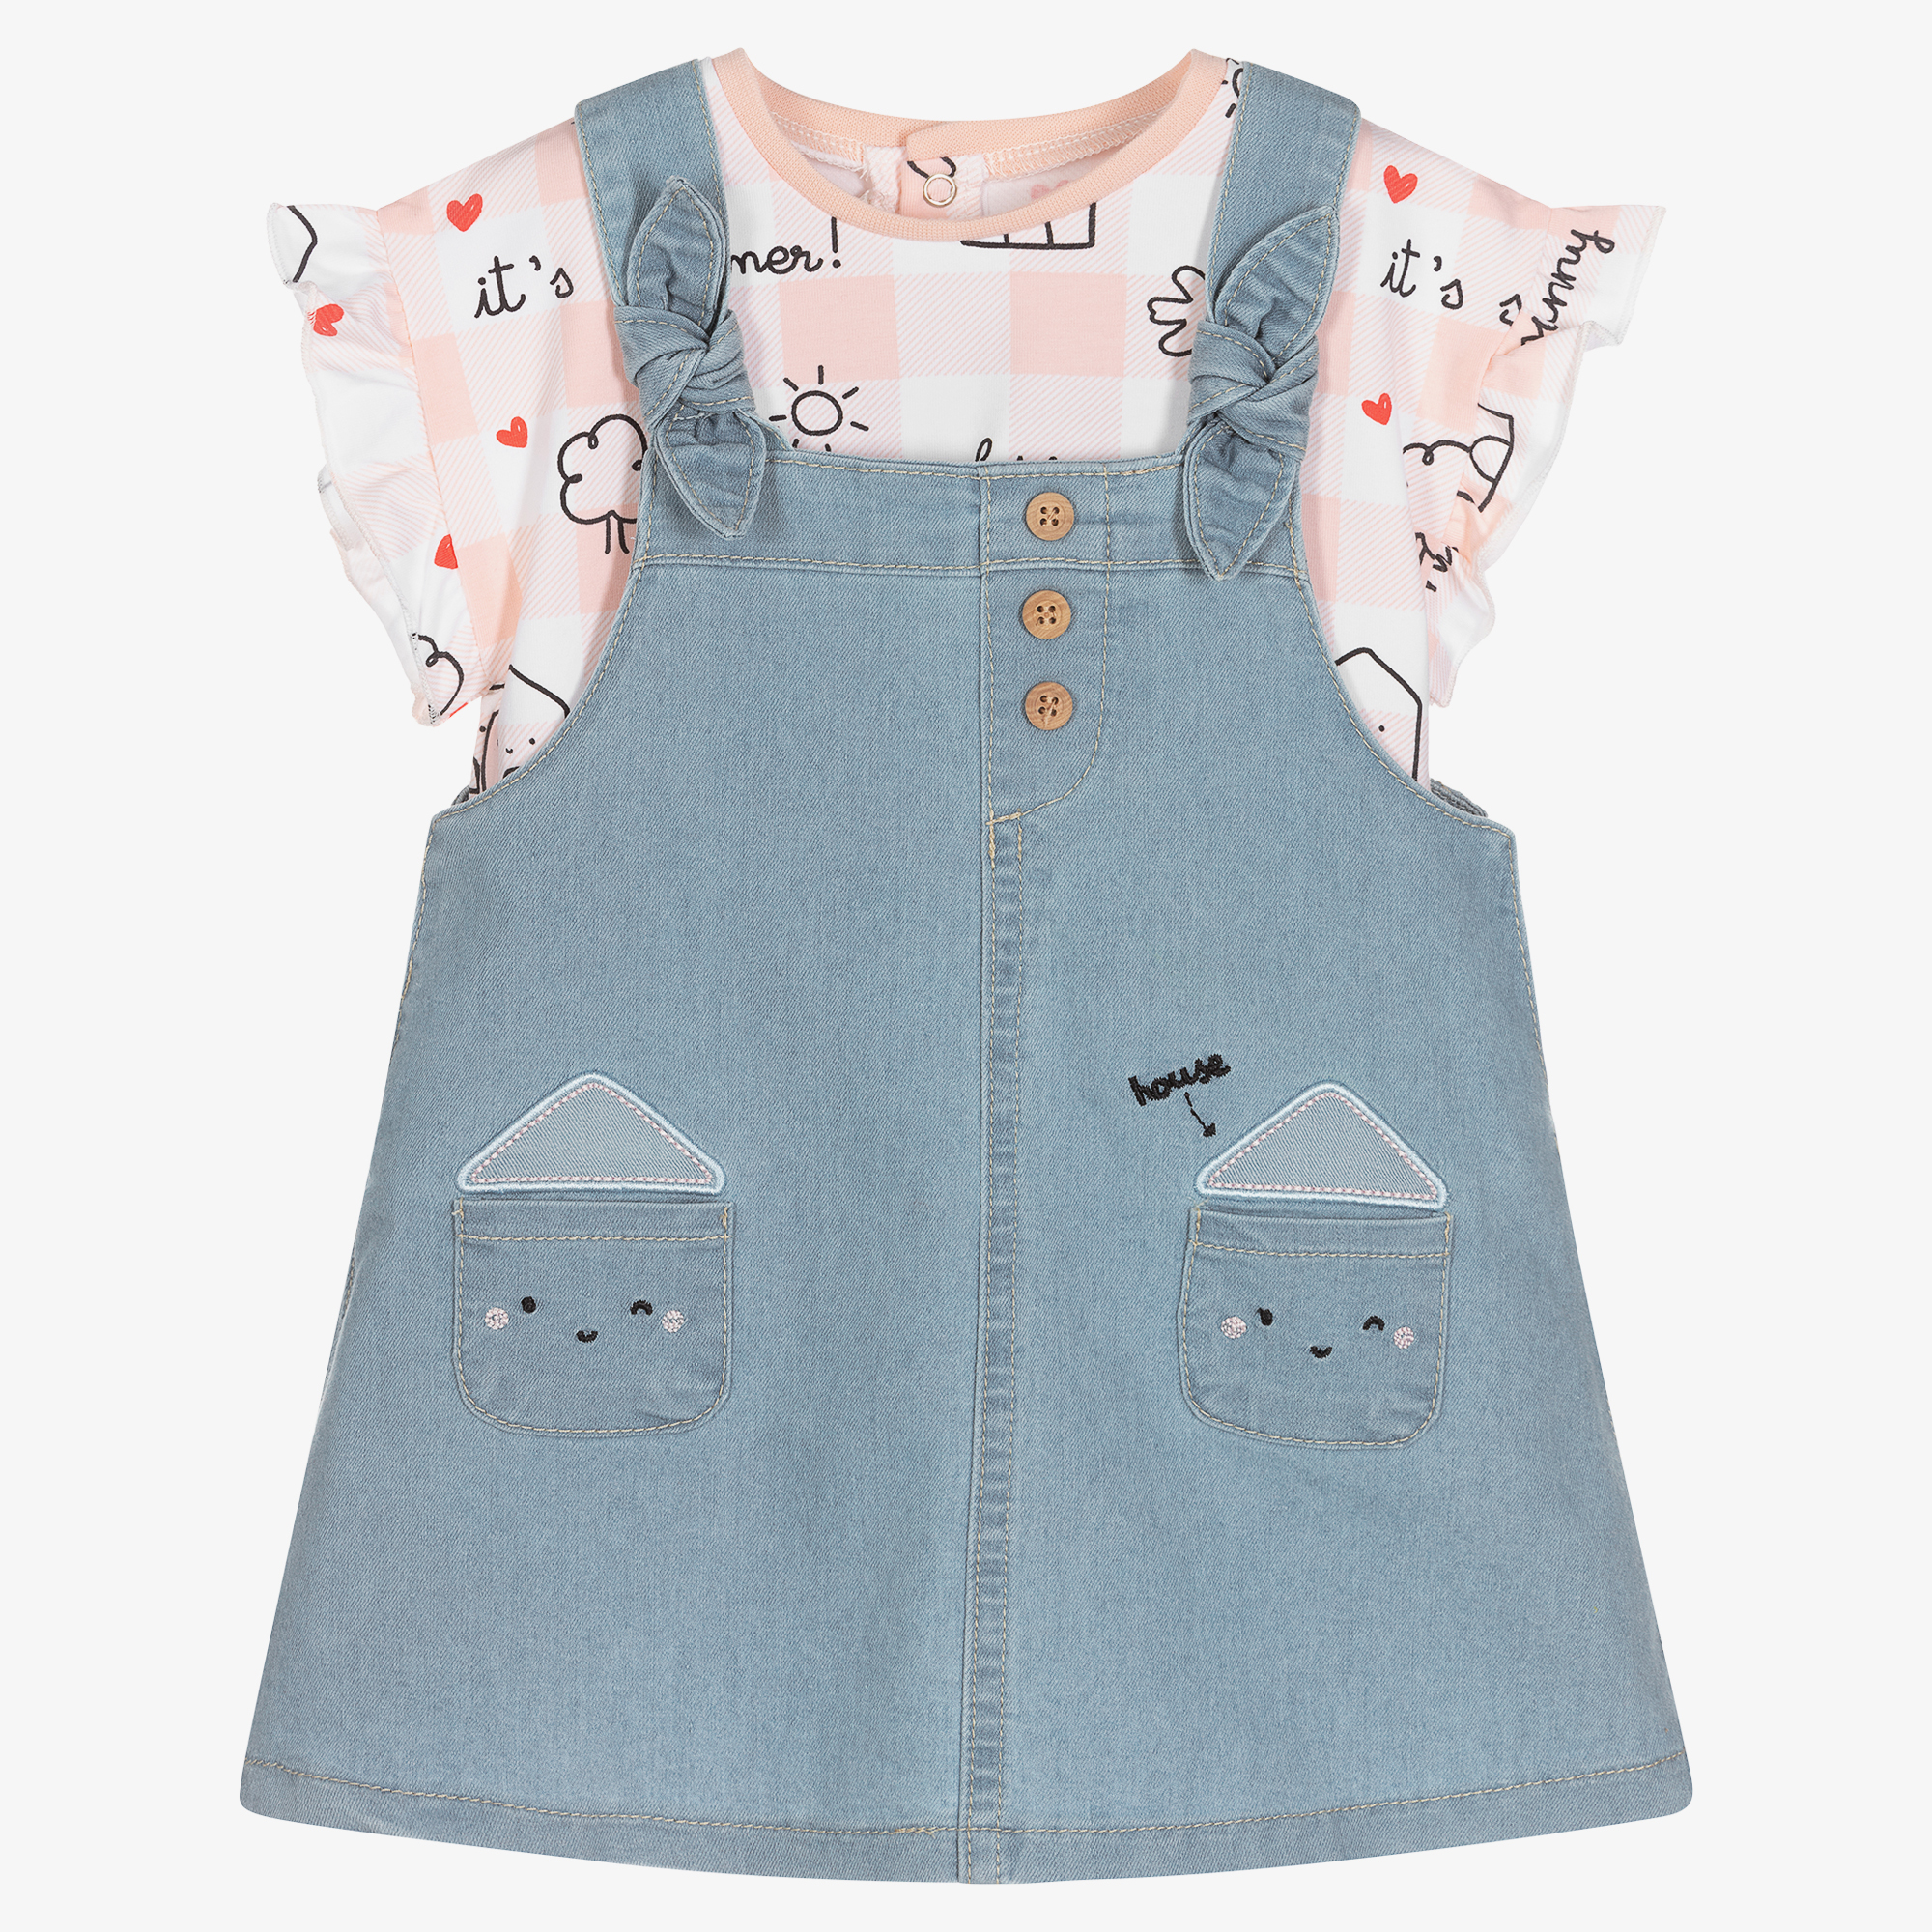 Denim Baby Girl Clothes 0-24 Months for Baby - JCPenney-sgquangbinhtourist.com.vn